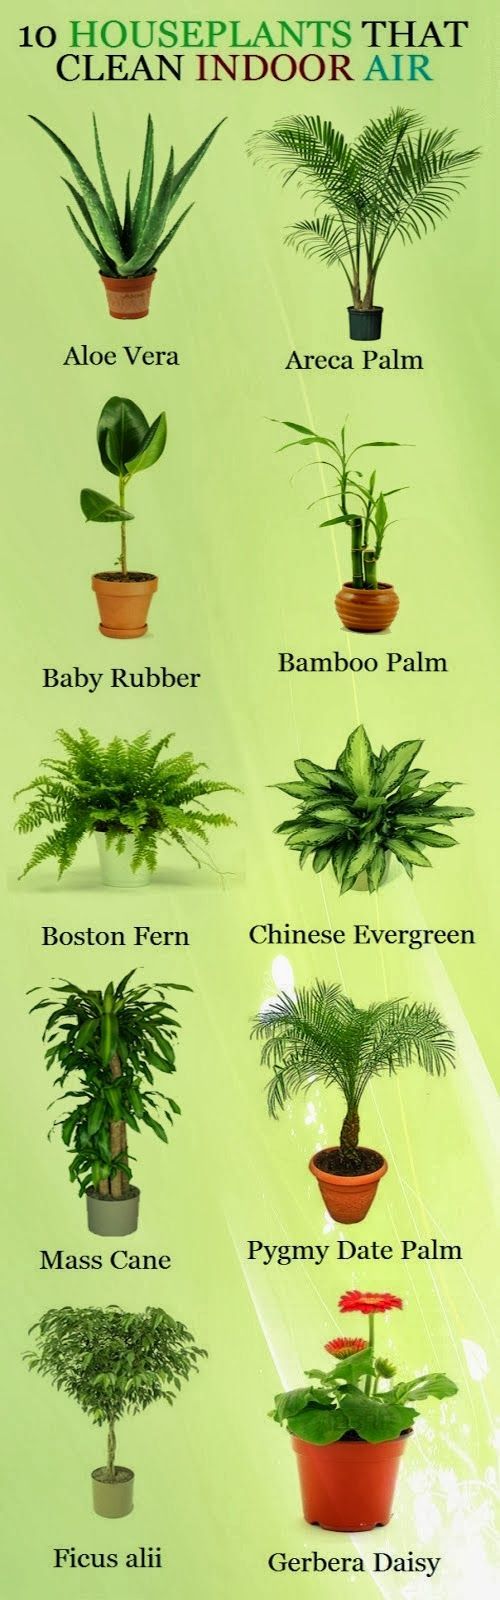 Ten Houseplants That Clean Indoor Air.  Looking at all the lists like this, Im t